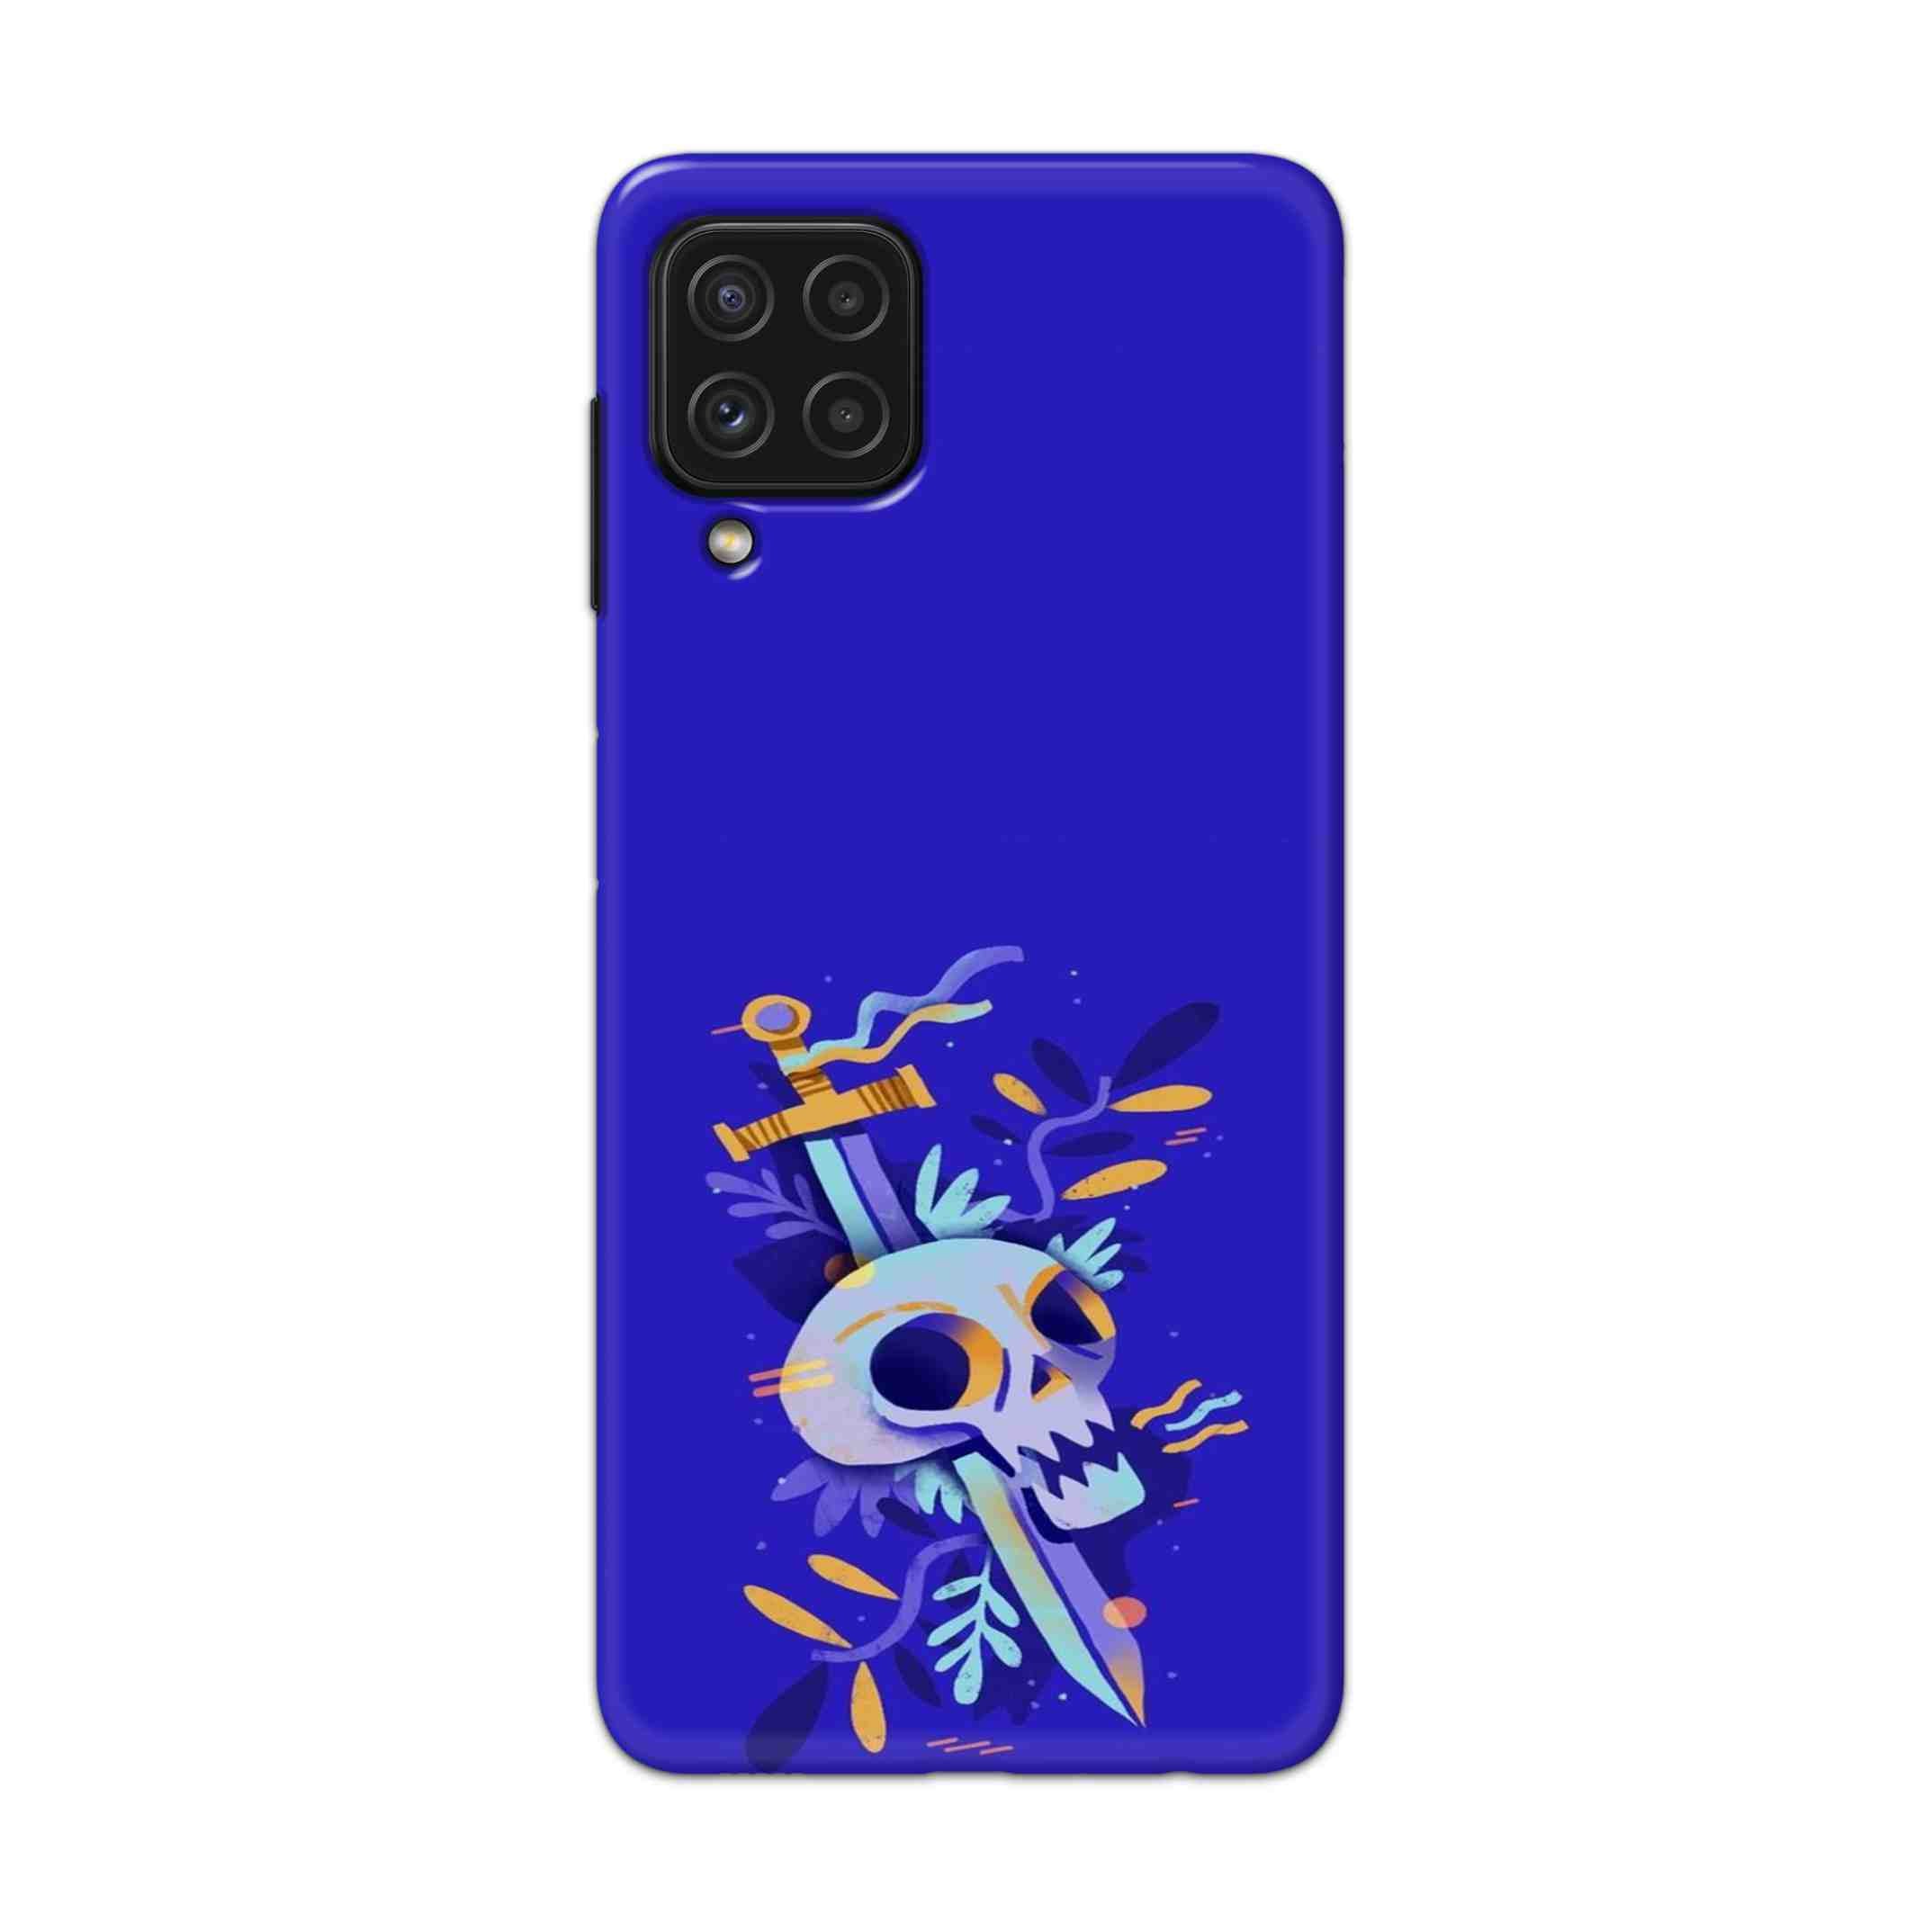 Buy Blue Skull Hard Back Mobile Phone Case Cover For Samsung Galaxy A22 Online